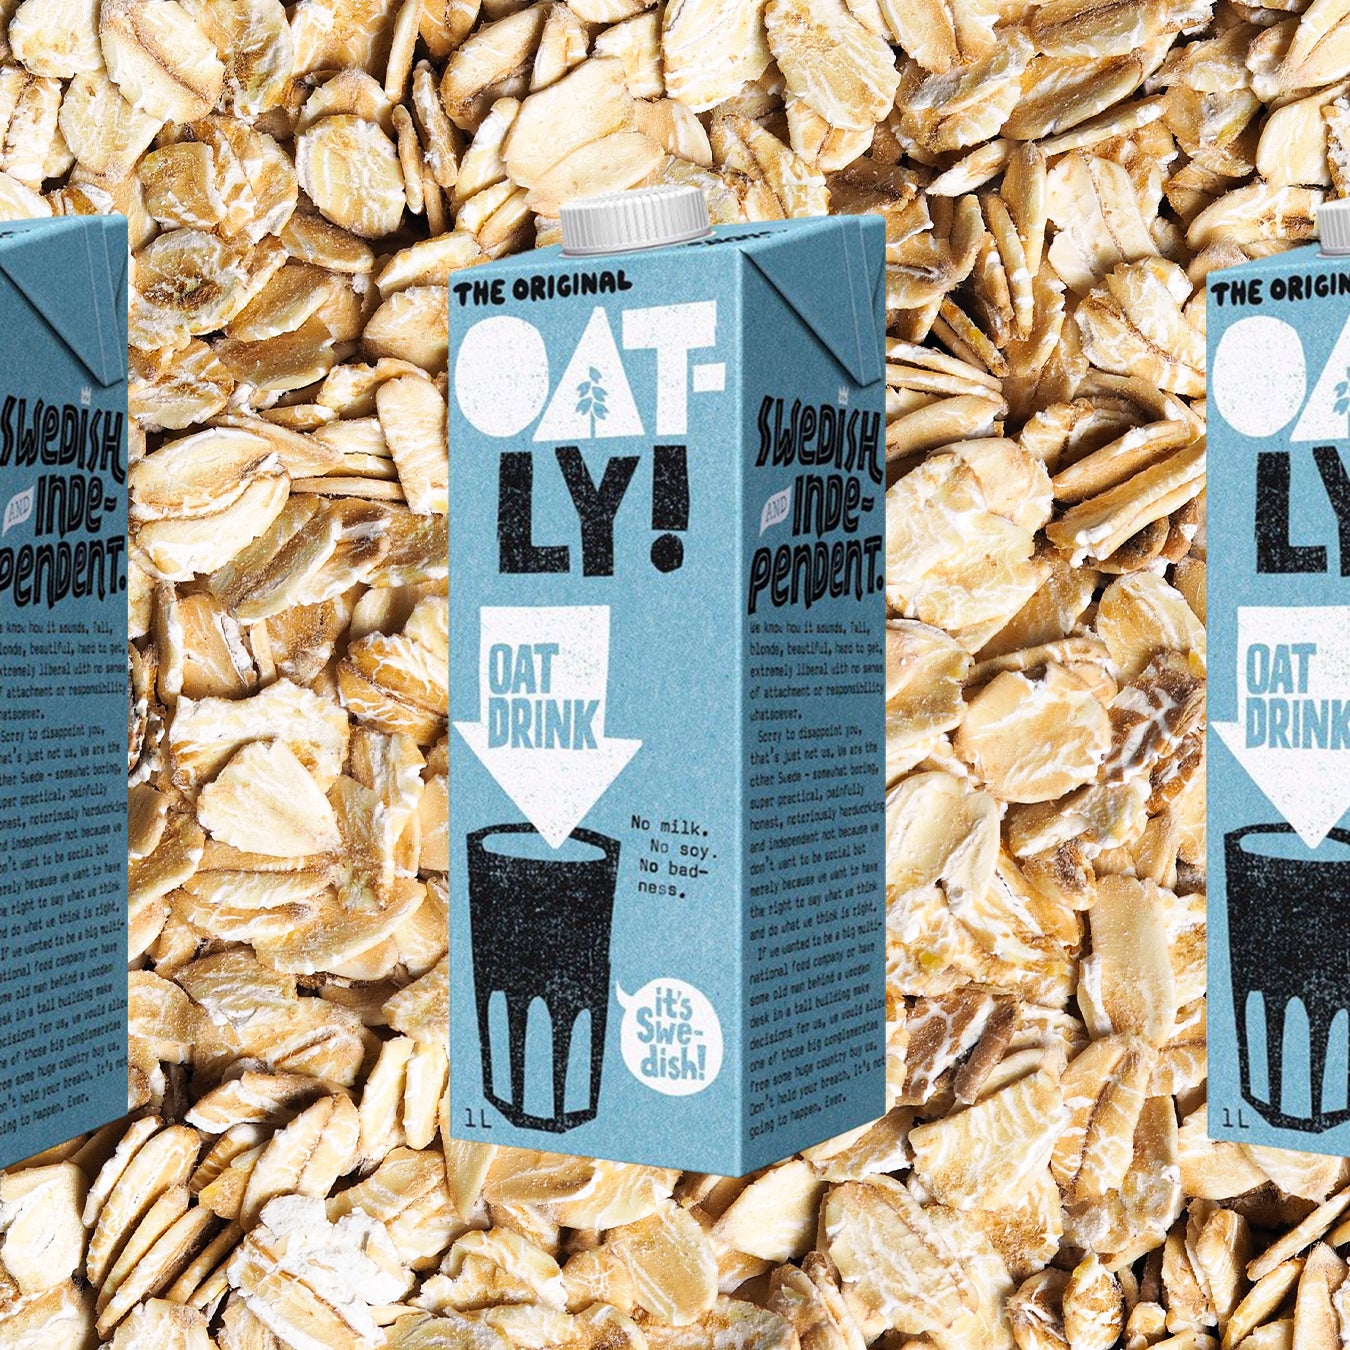 Is Oat Milk Good for You? - Oat Milk Nutrition Facts and Benefits